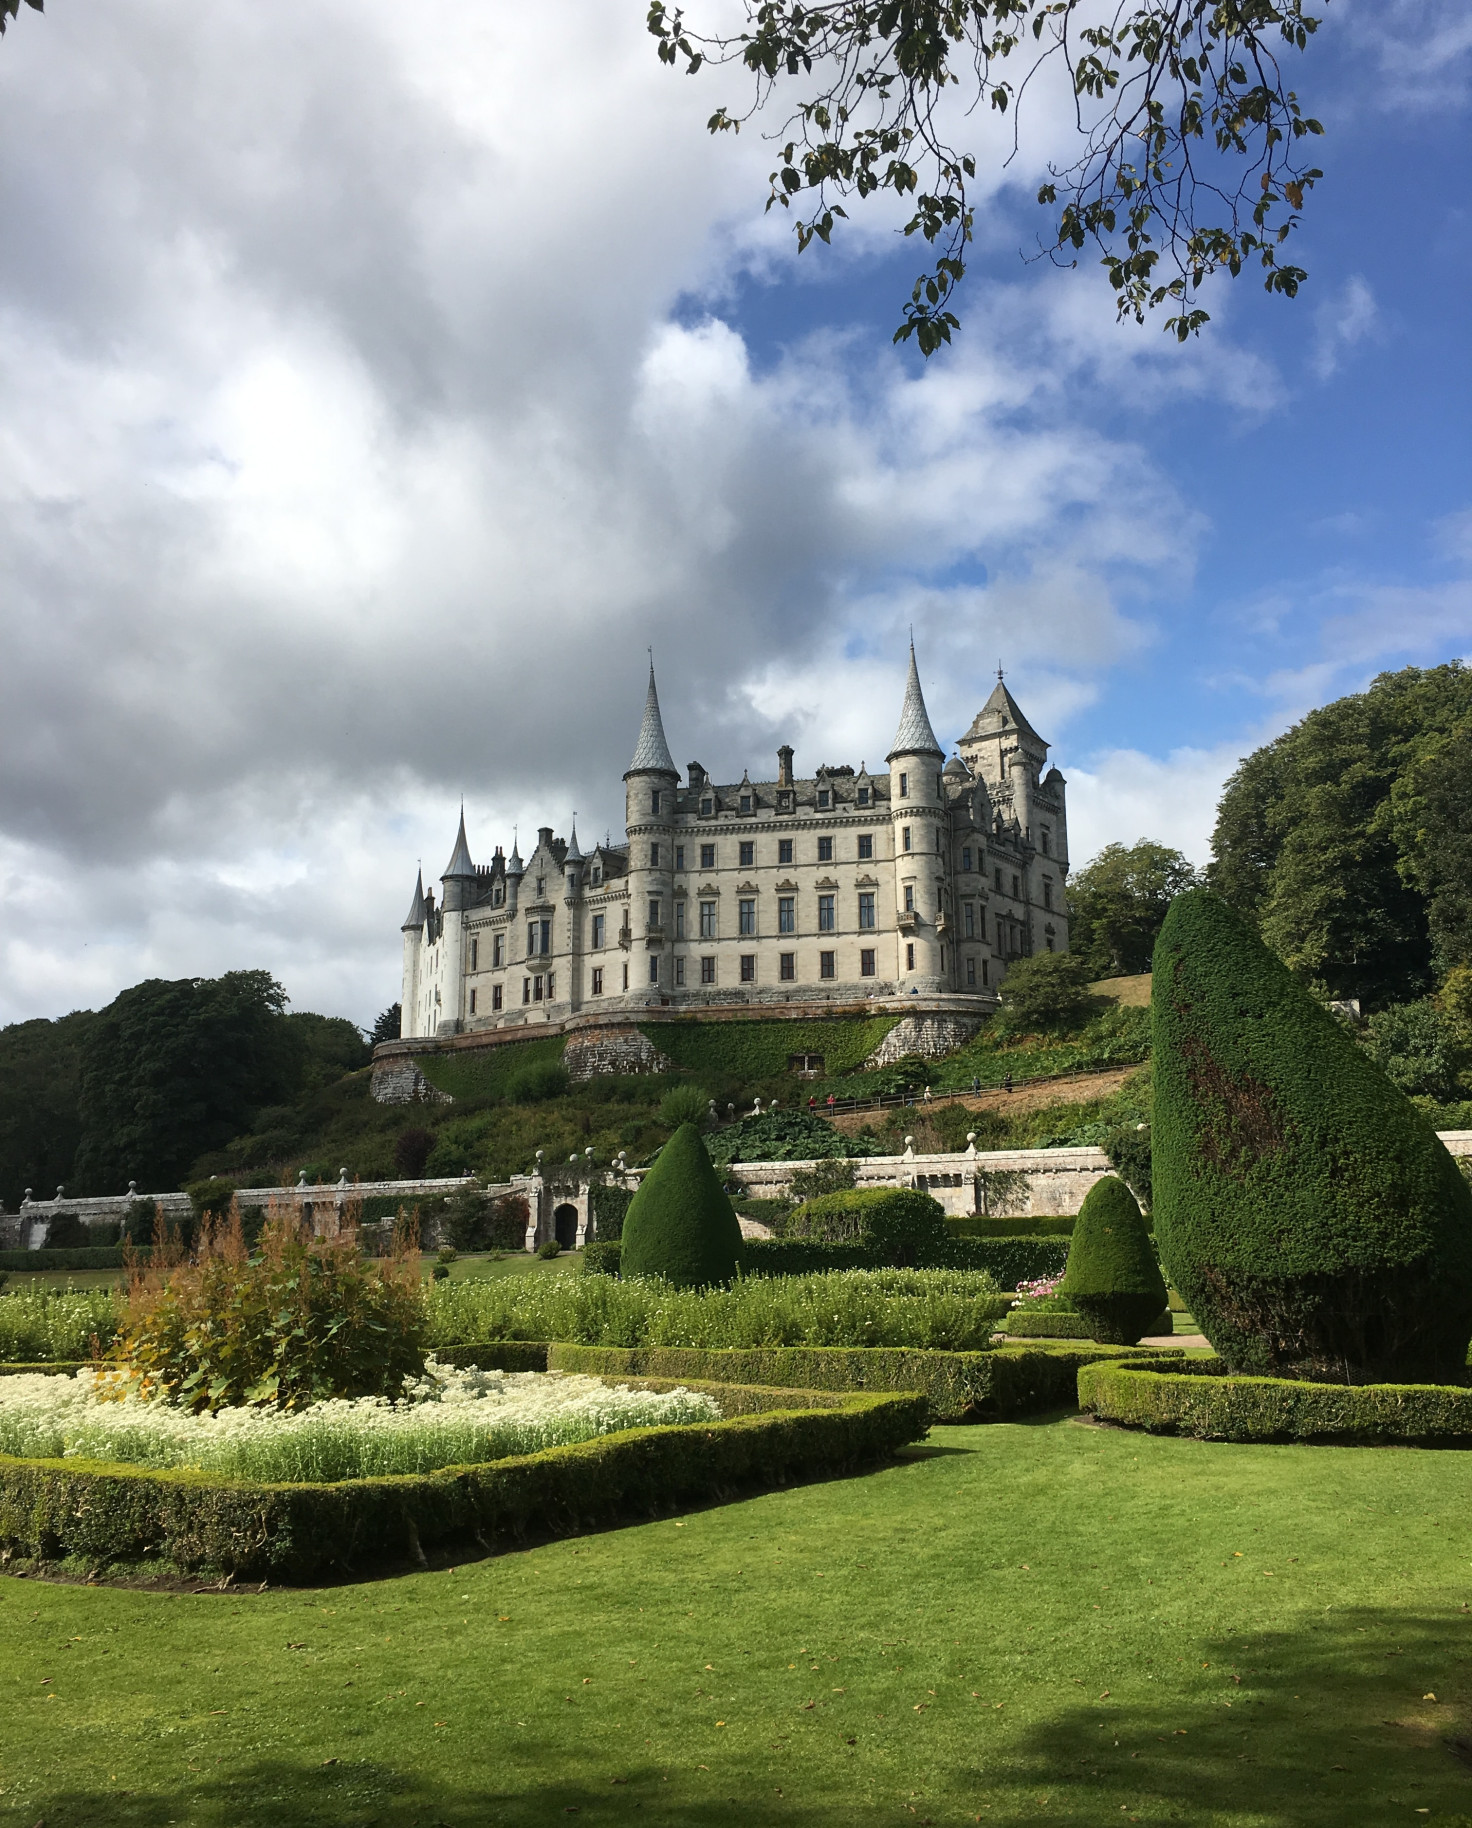 A view of Dunrobin Castle in Scotland from the garden